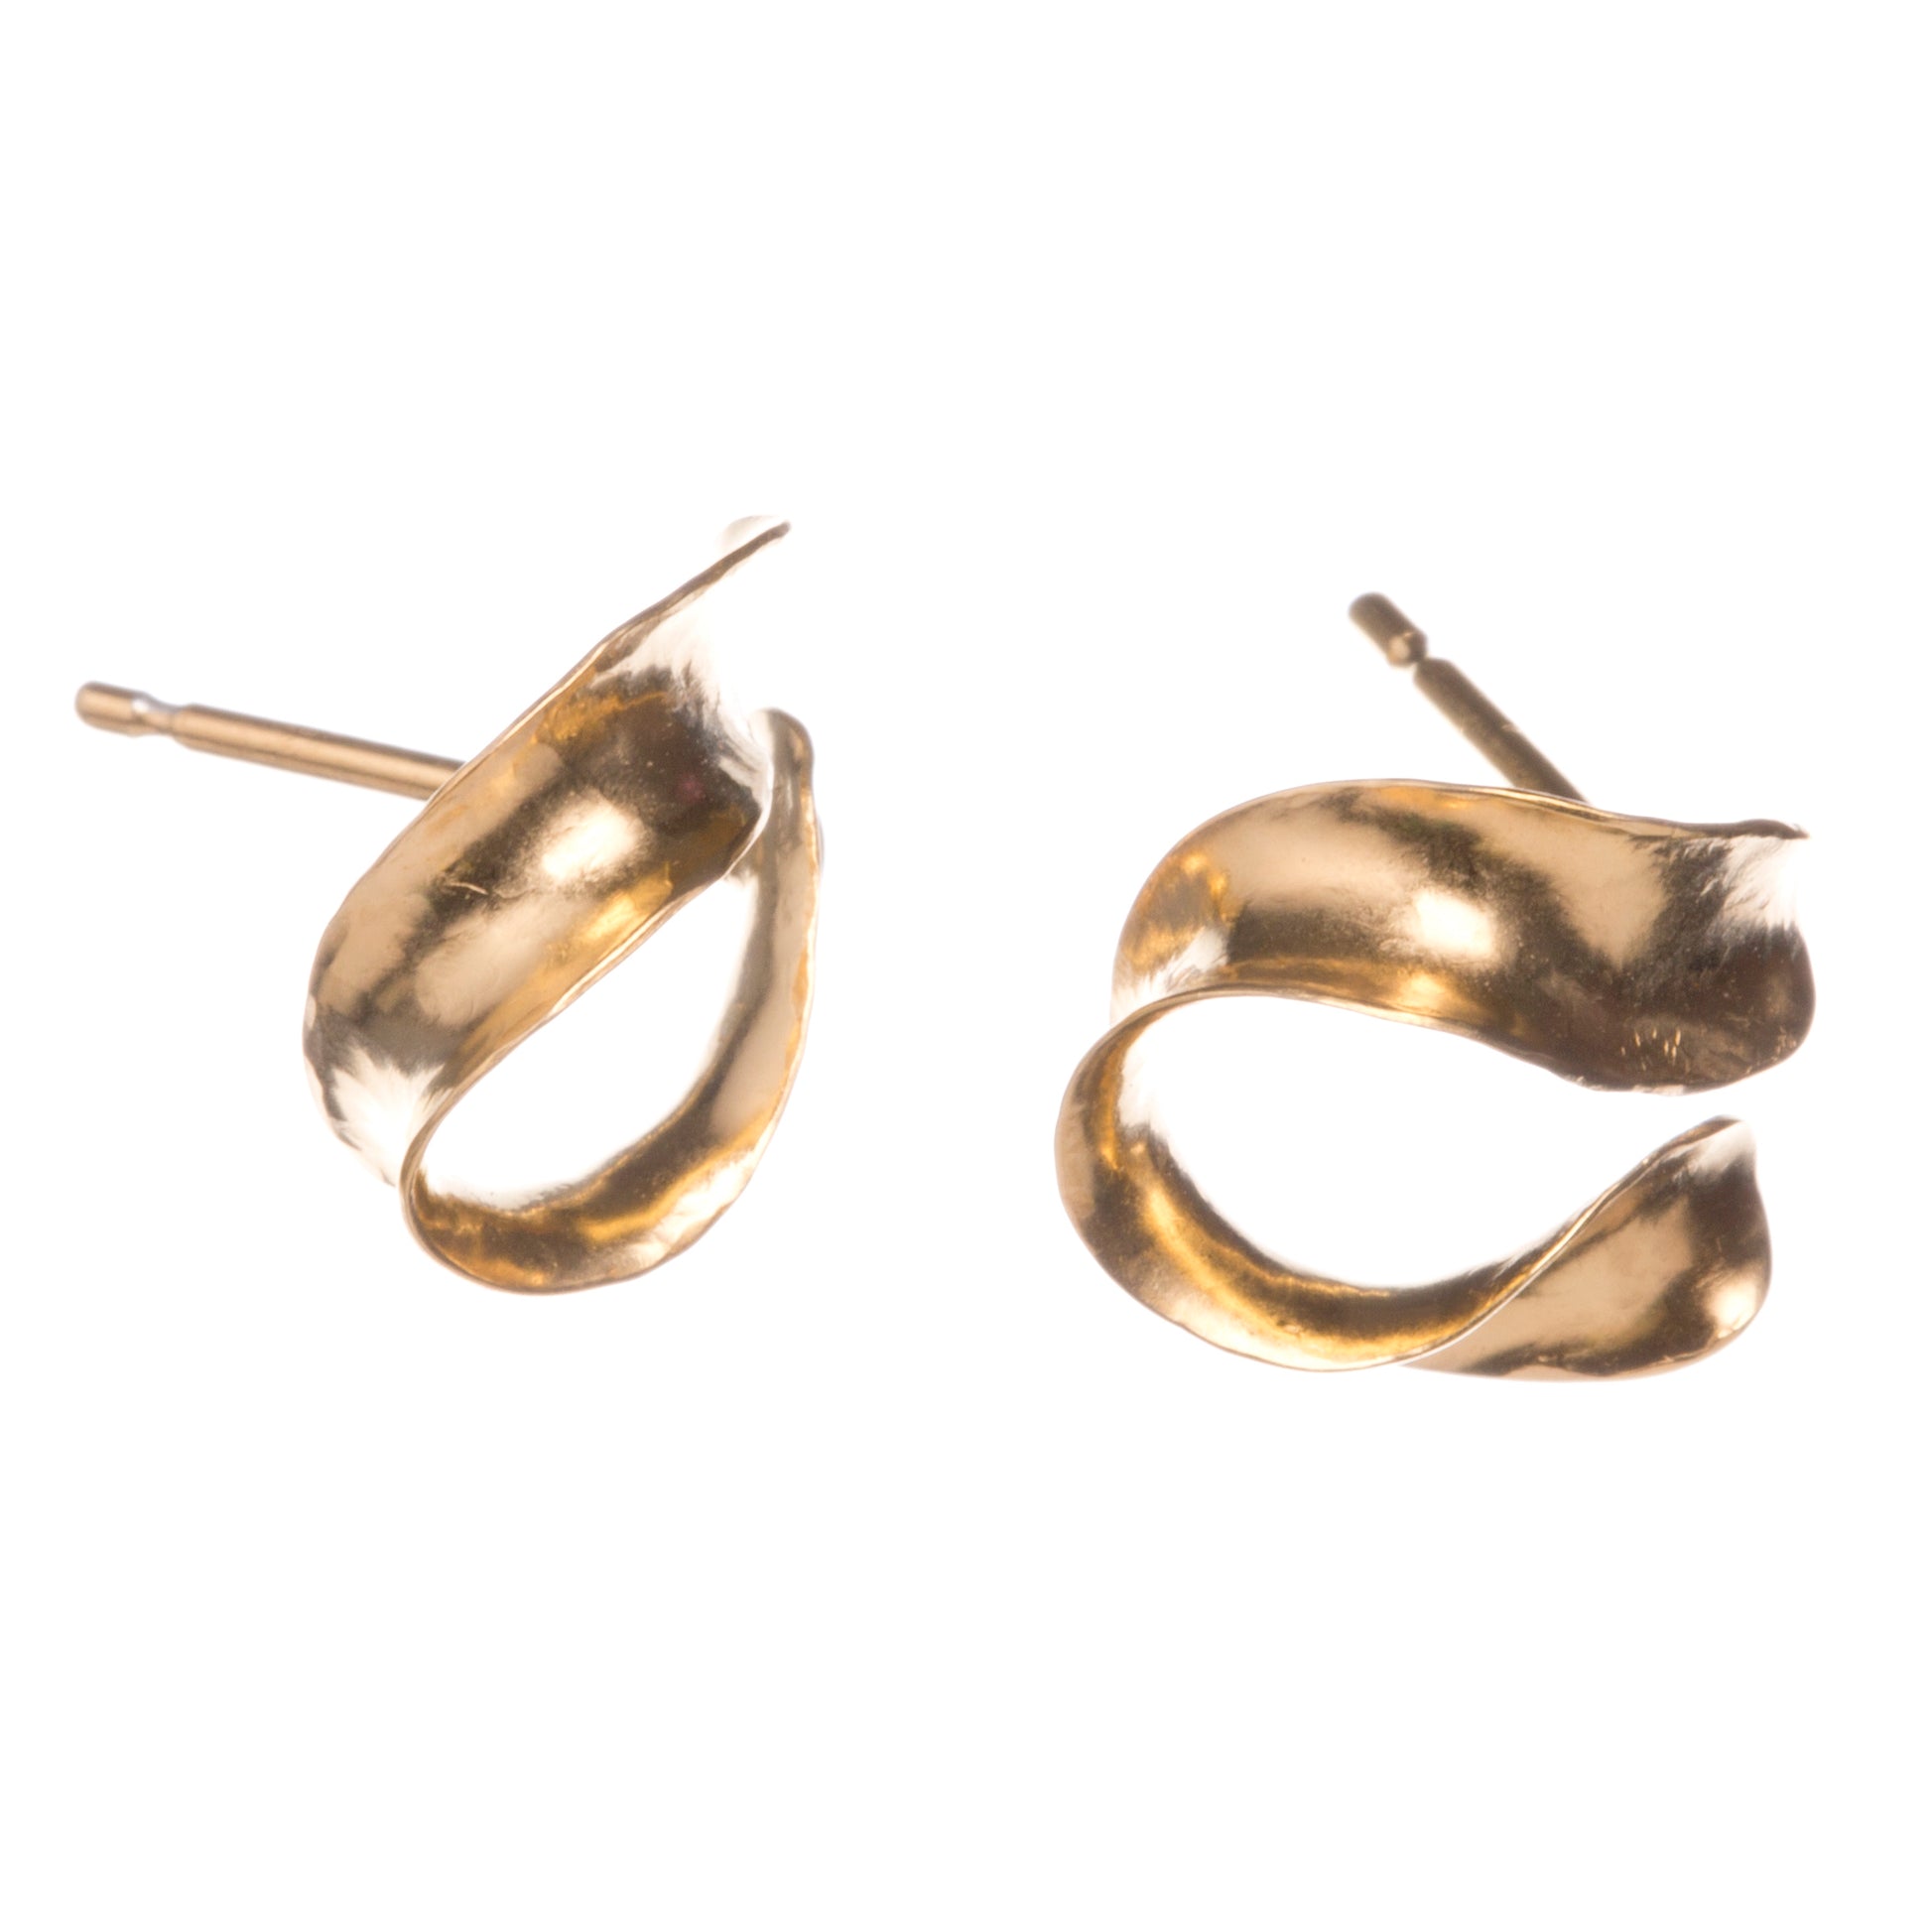 A pair of lightweight silver horseshoe earrings, gold plated, which curl gently below the earlobe. The different views show the three-dimensional curve. They fasten with a silver butterfly.